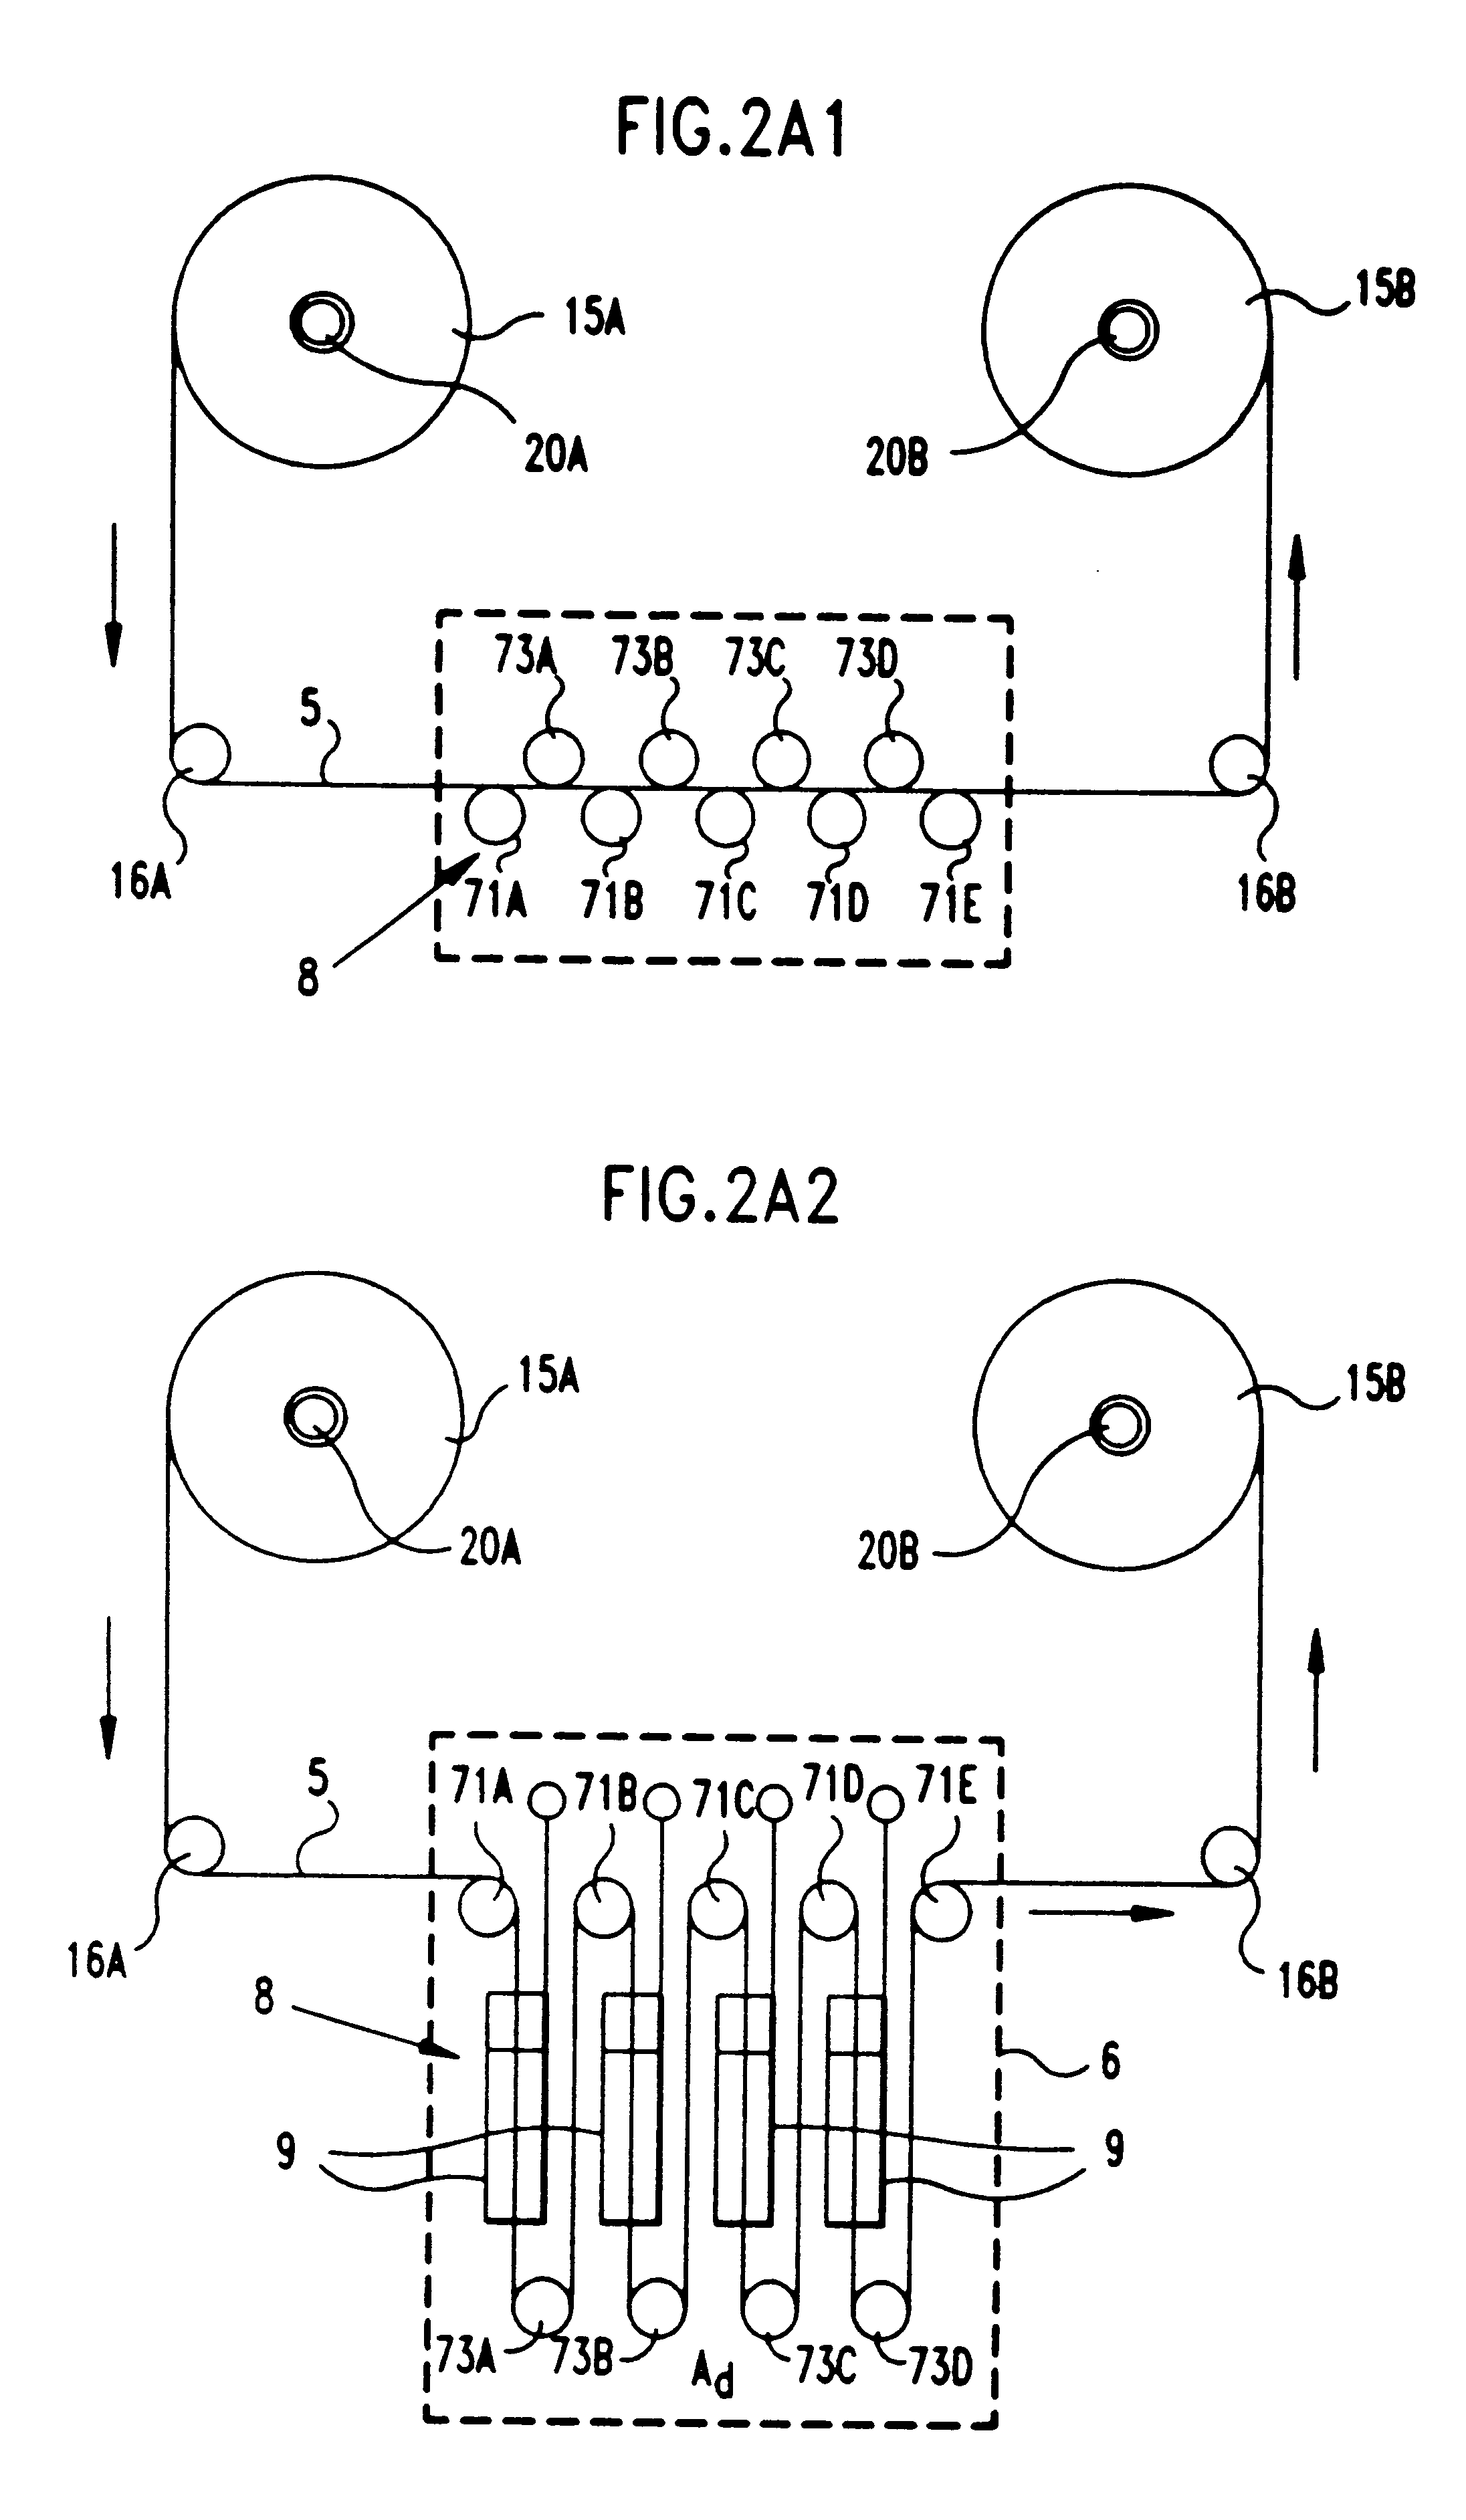 Metal-air fuel cell battery systems having mechanism for extending the path length of metal-fuel tape during discharging and recharging modes of operation